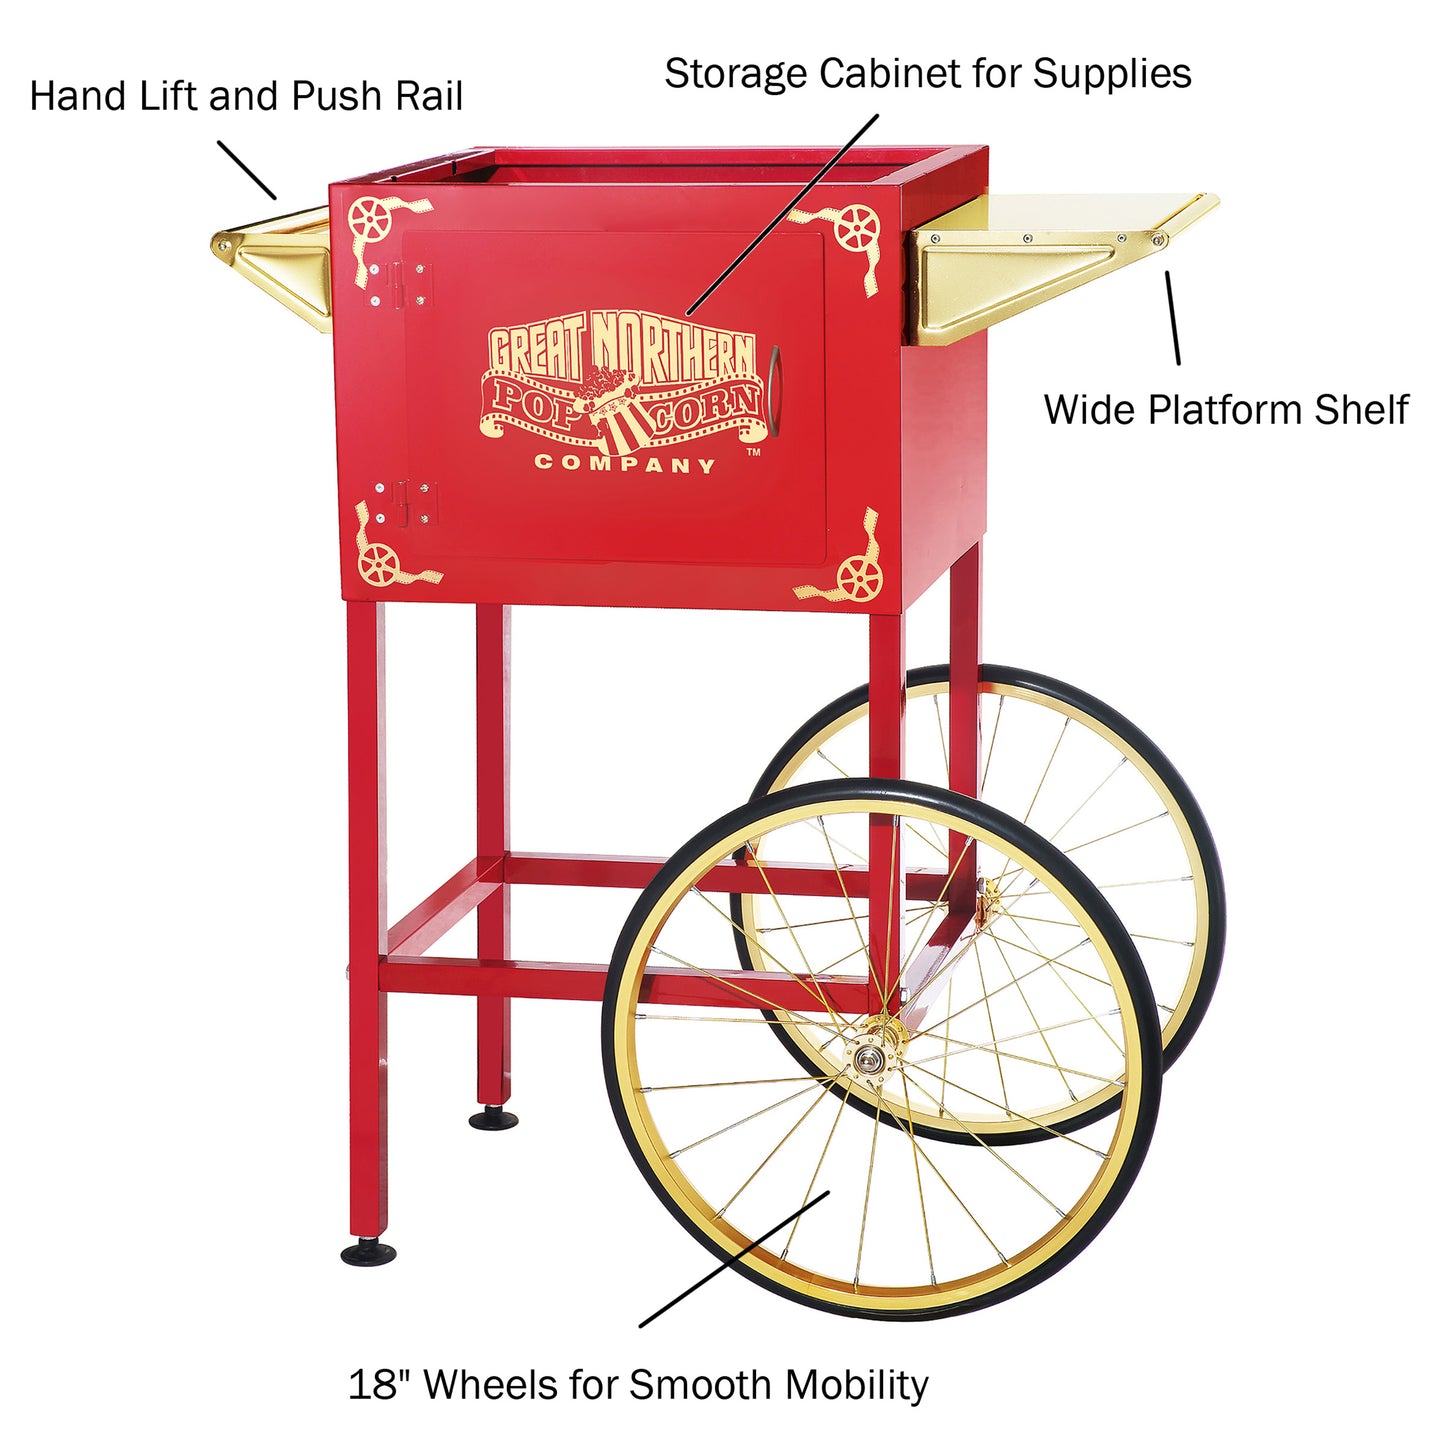 Popcorn Cart for 8 Ounce Popcorn Machines - Red